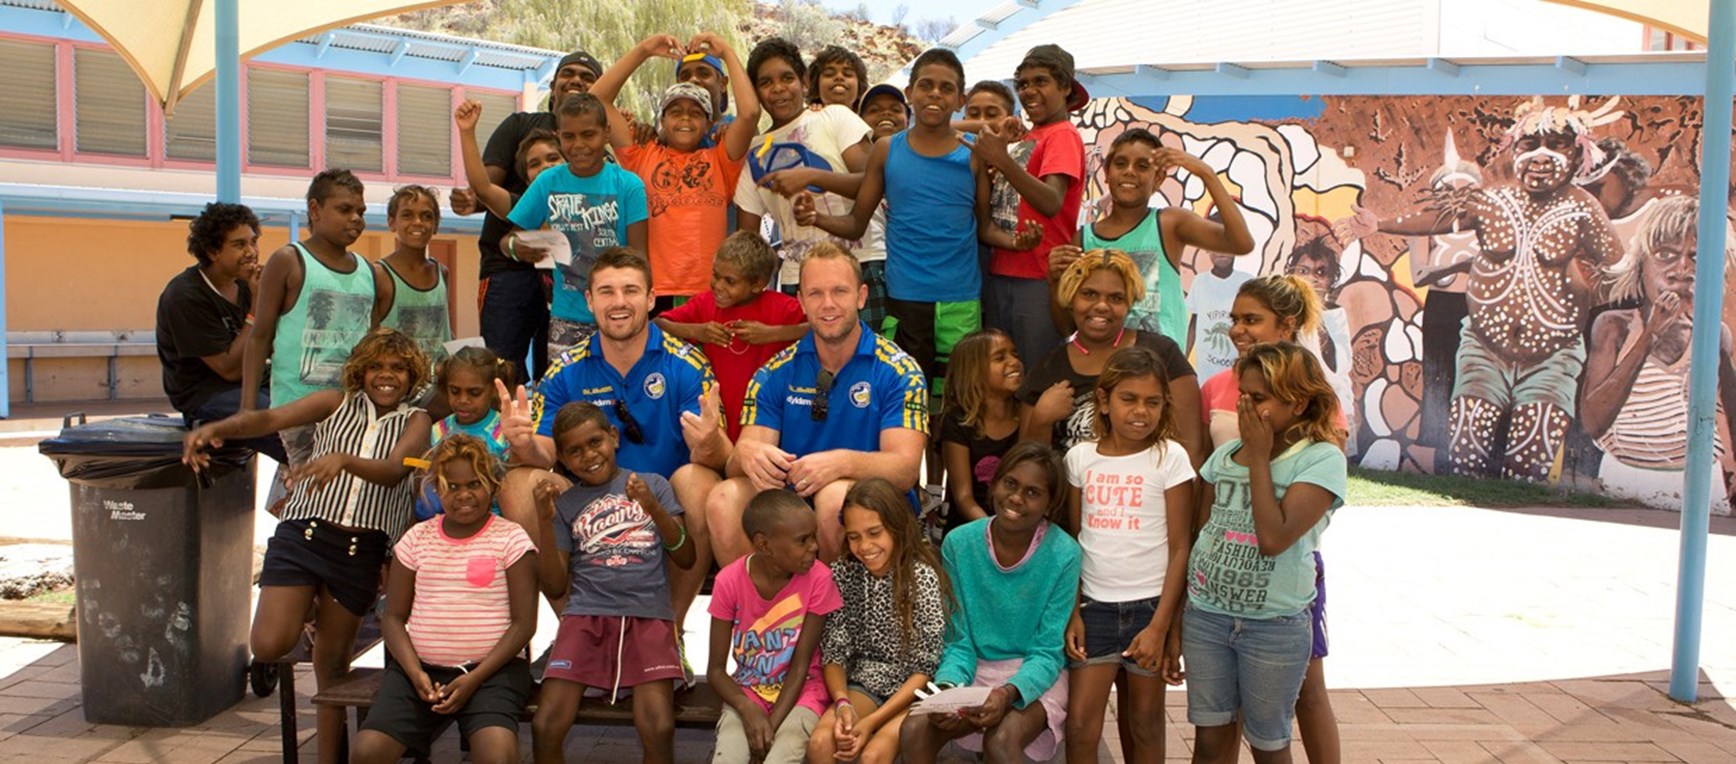 Gallery: The Eels #tacklebullying